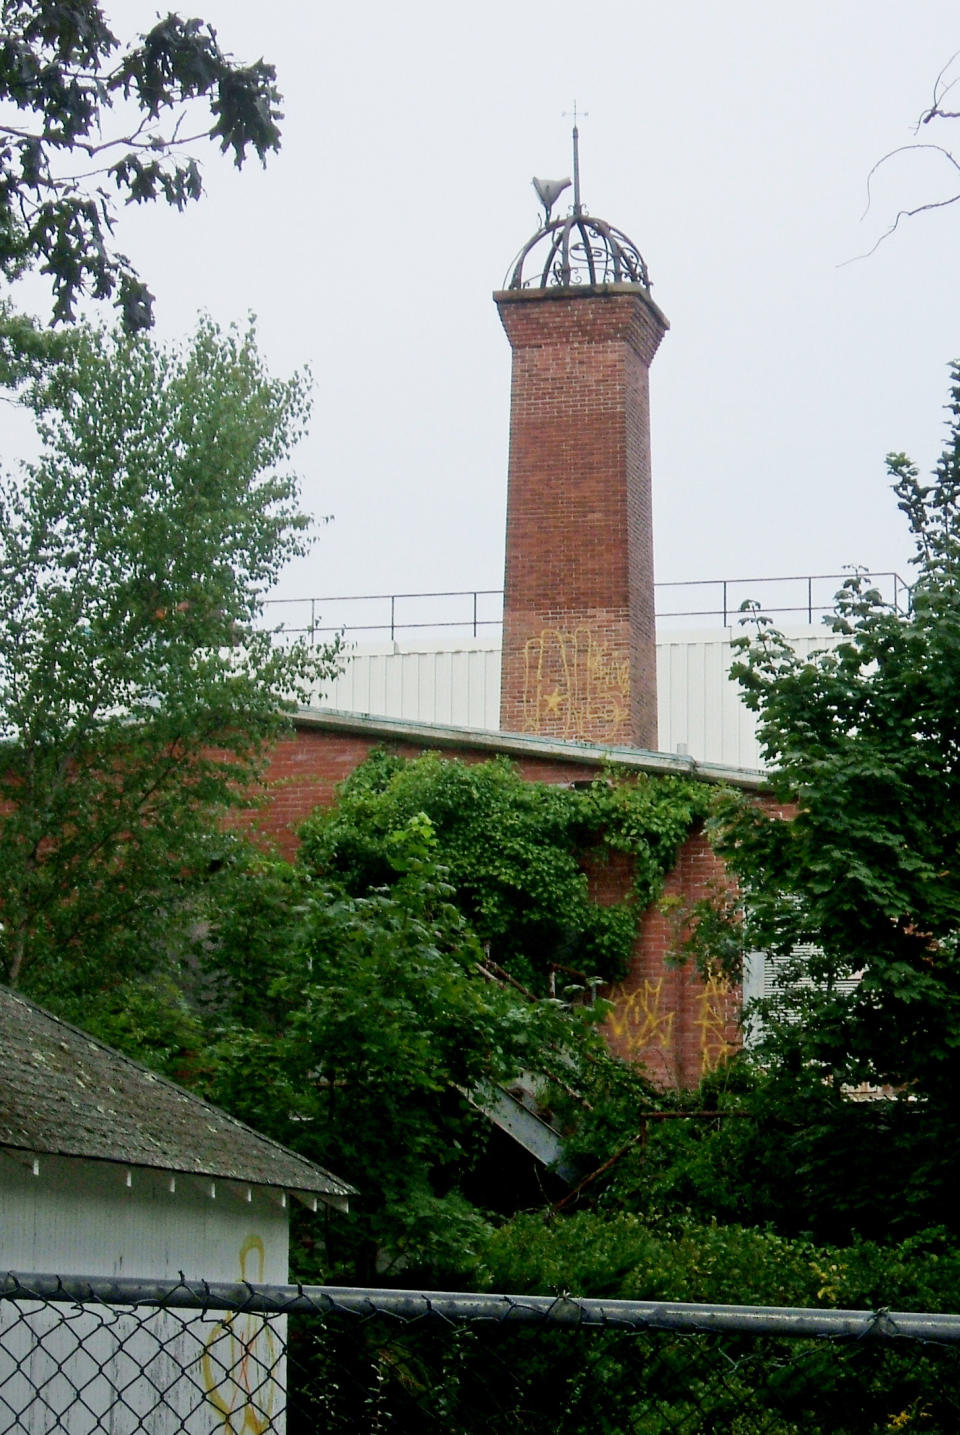 In this Thursday, Aug. 23, 2012 photo, a brick tower rises above the Shoreham, N.Y., building that was once the laboratory of physicist/inventor Nicola Tesla. In little more than a week, donors from more than 100 countries have kicked in about $1 million through a social media website to pay for the restoration of the 110-year-old laboratory built for the visionary scientist who experimented with wireless communication and envisioned a world of free electricity. (AP Photo/Frank Eltman)